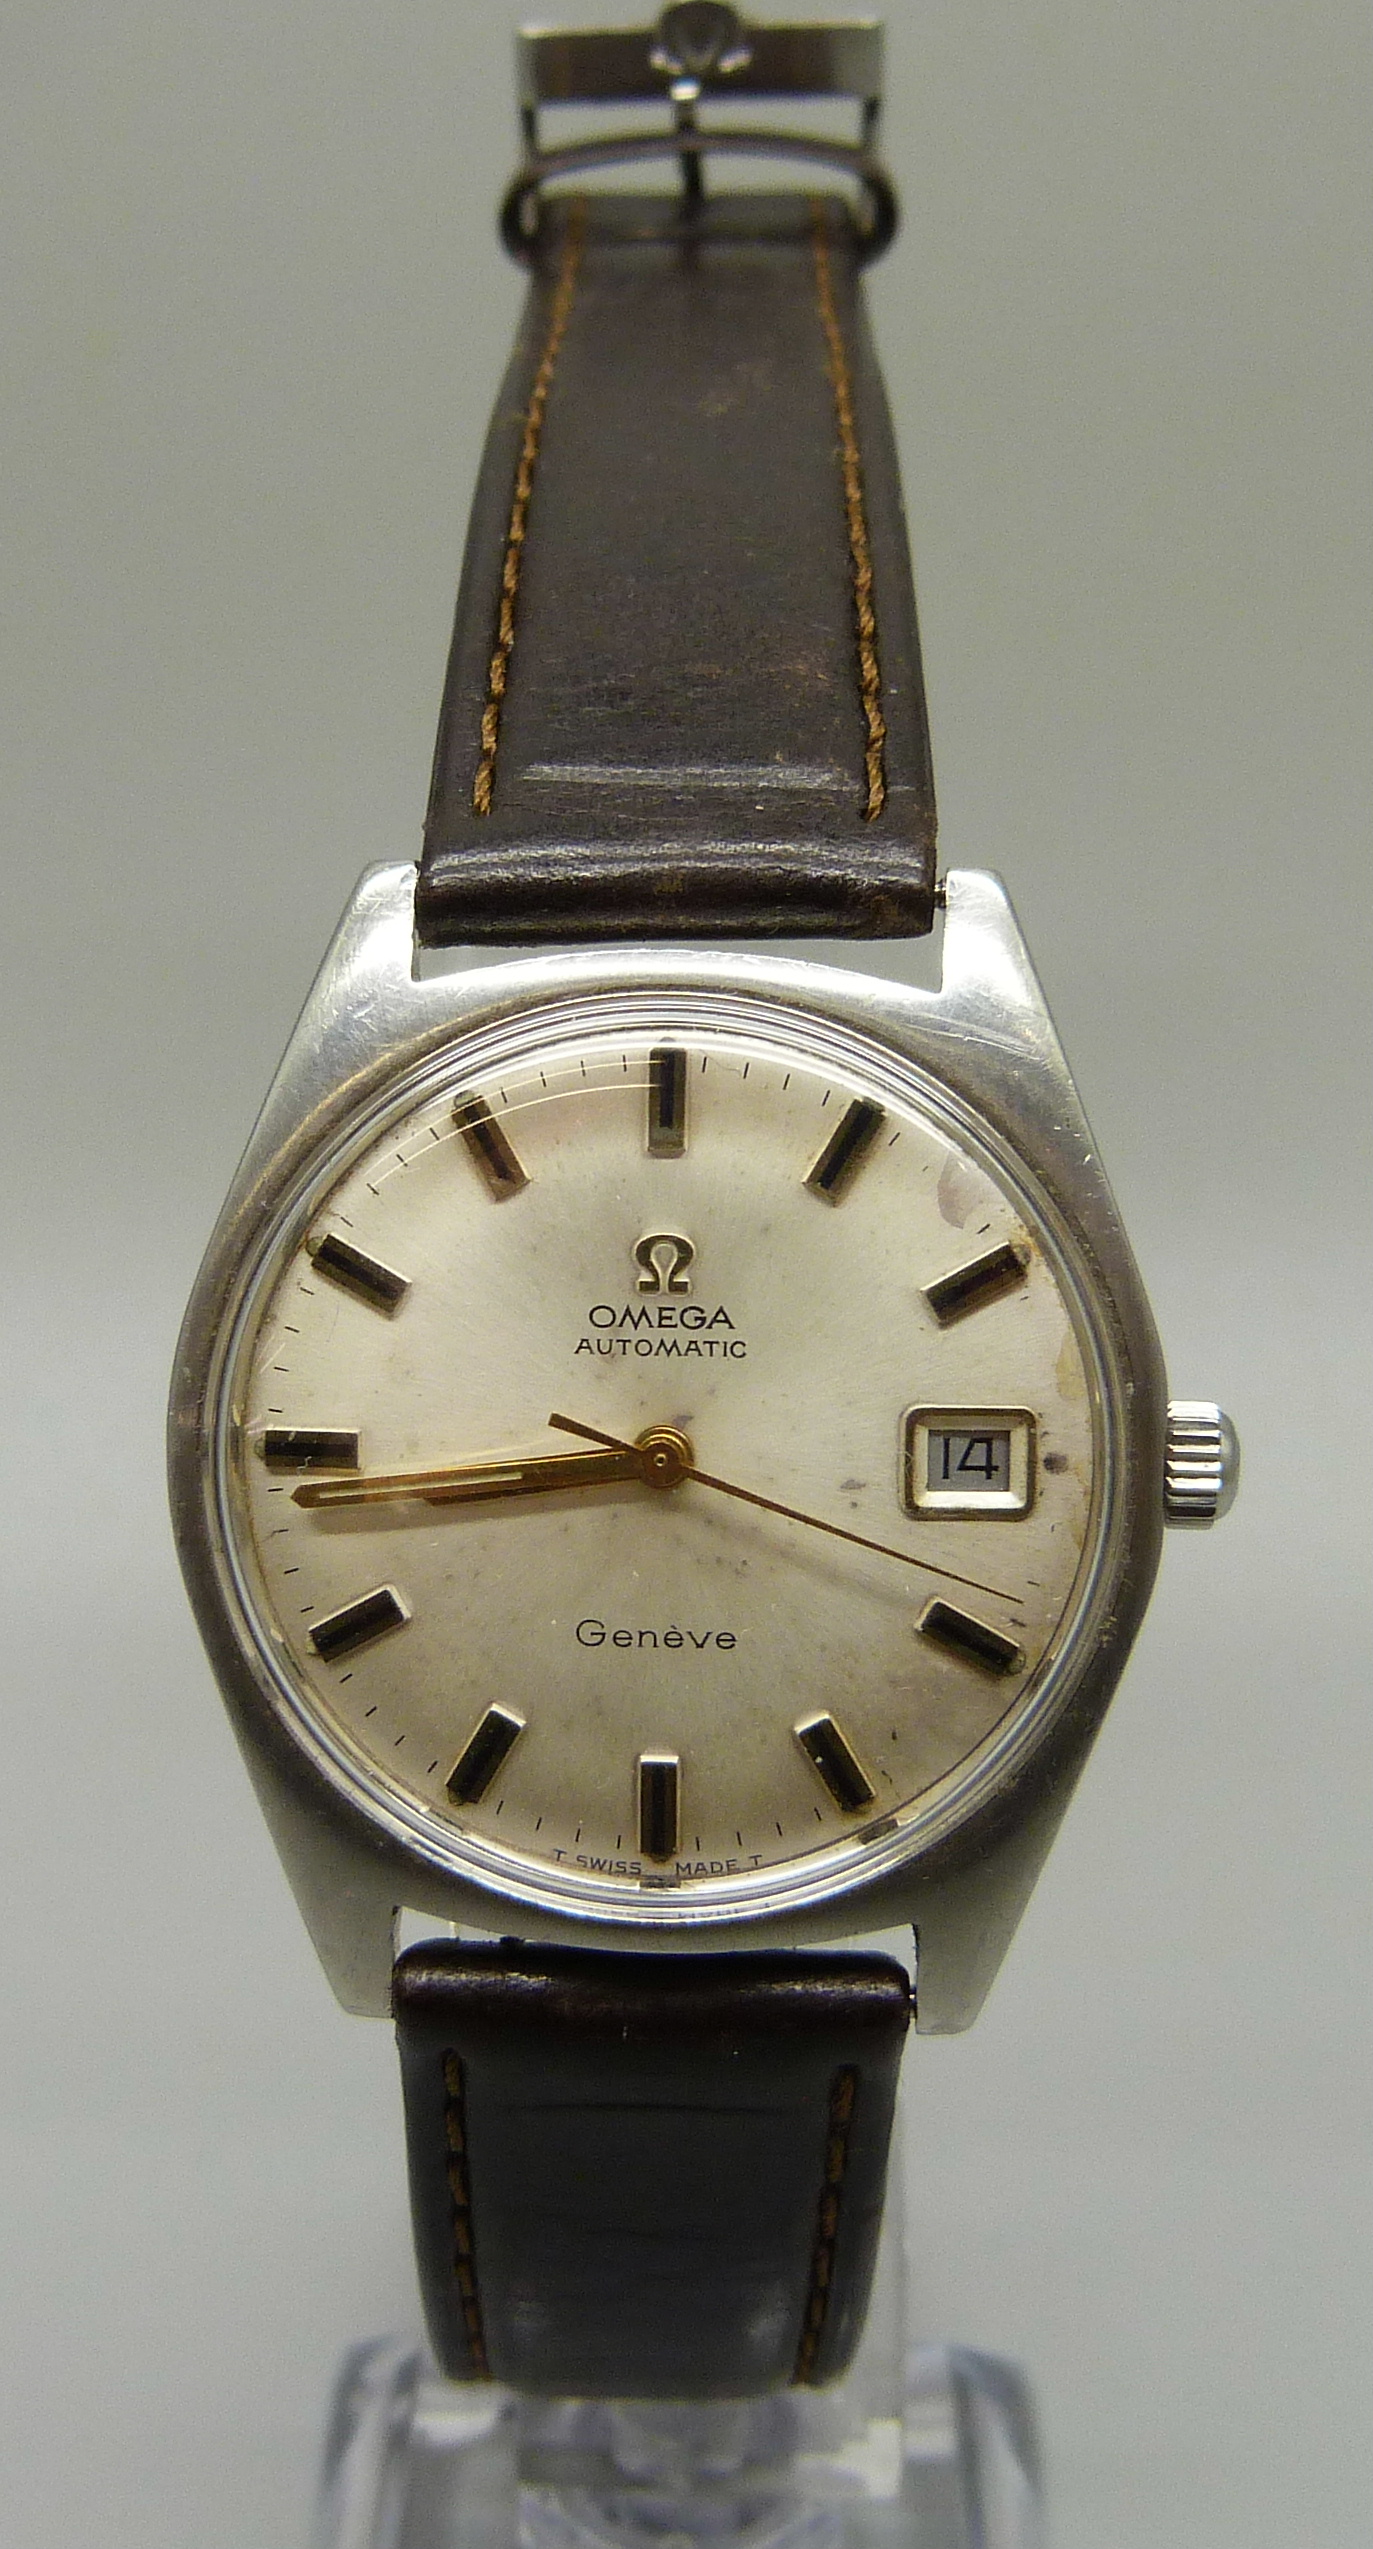 An Omega Geneve automatic date display wristwatch, with original buckle and an Omega carrier box